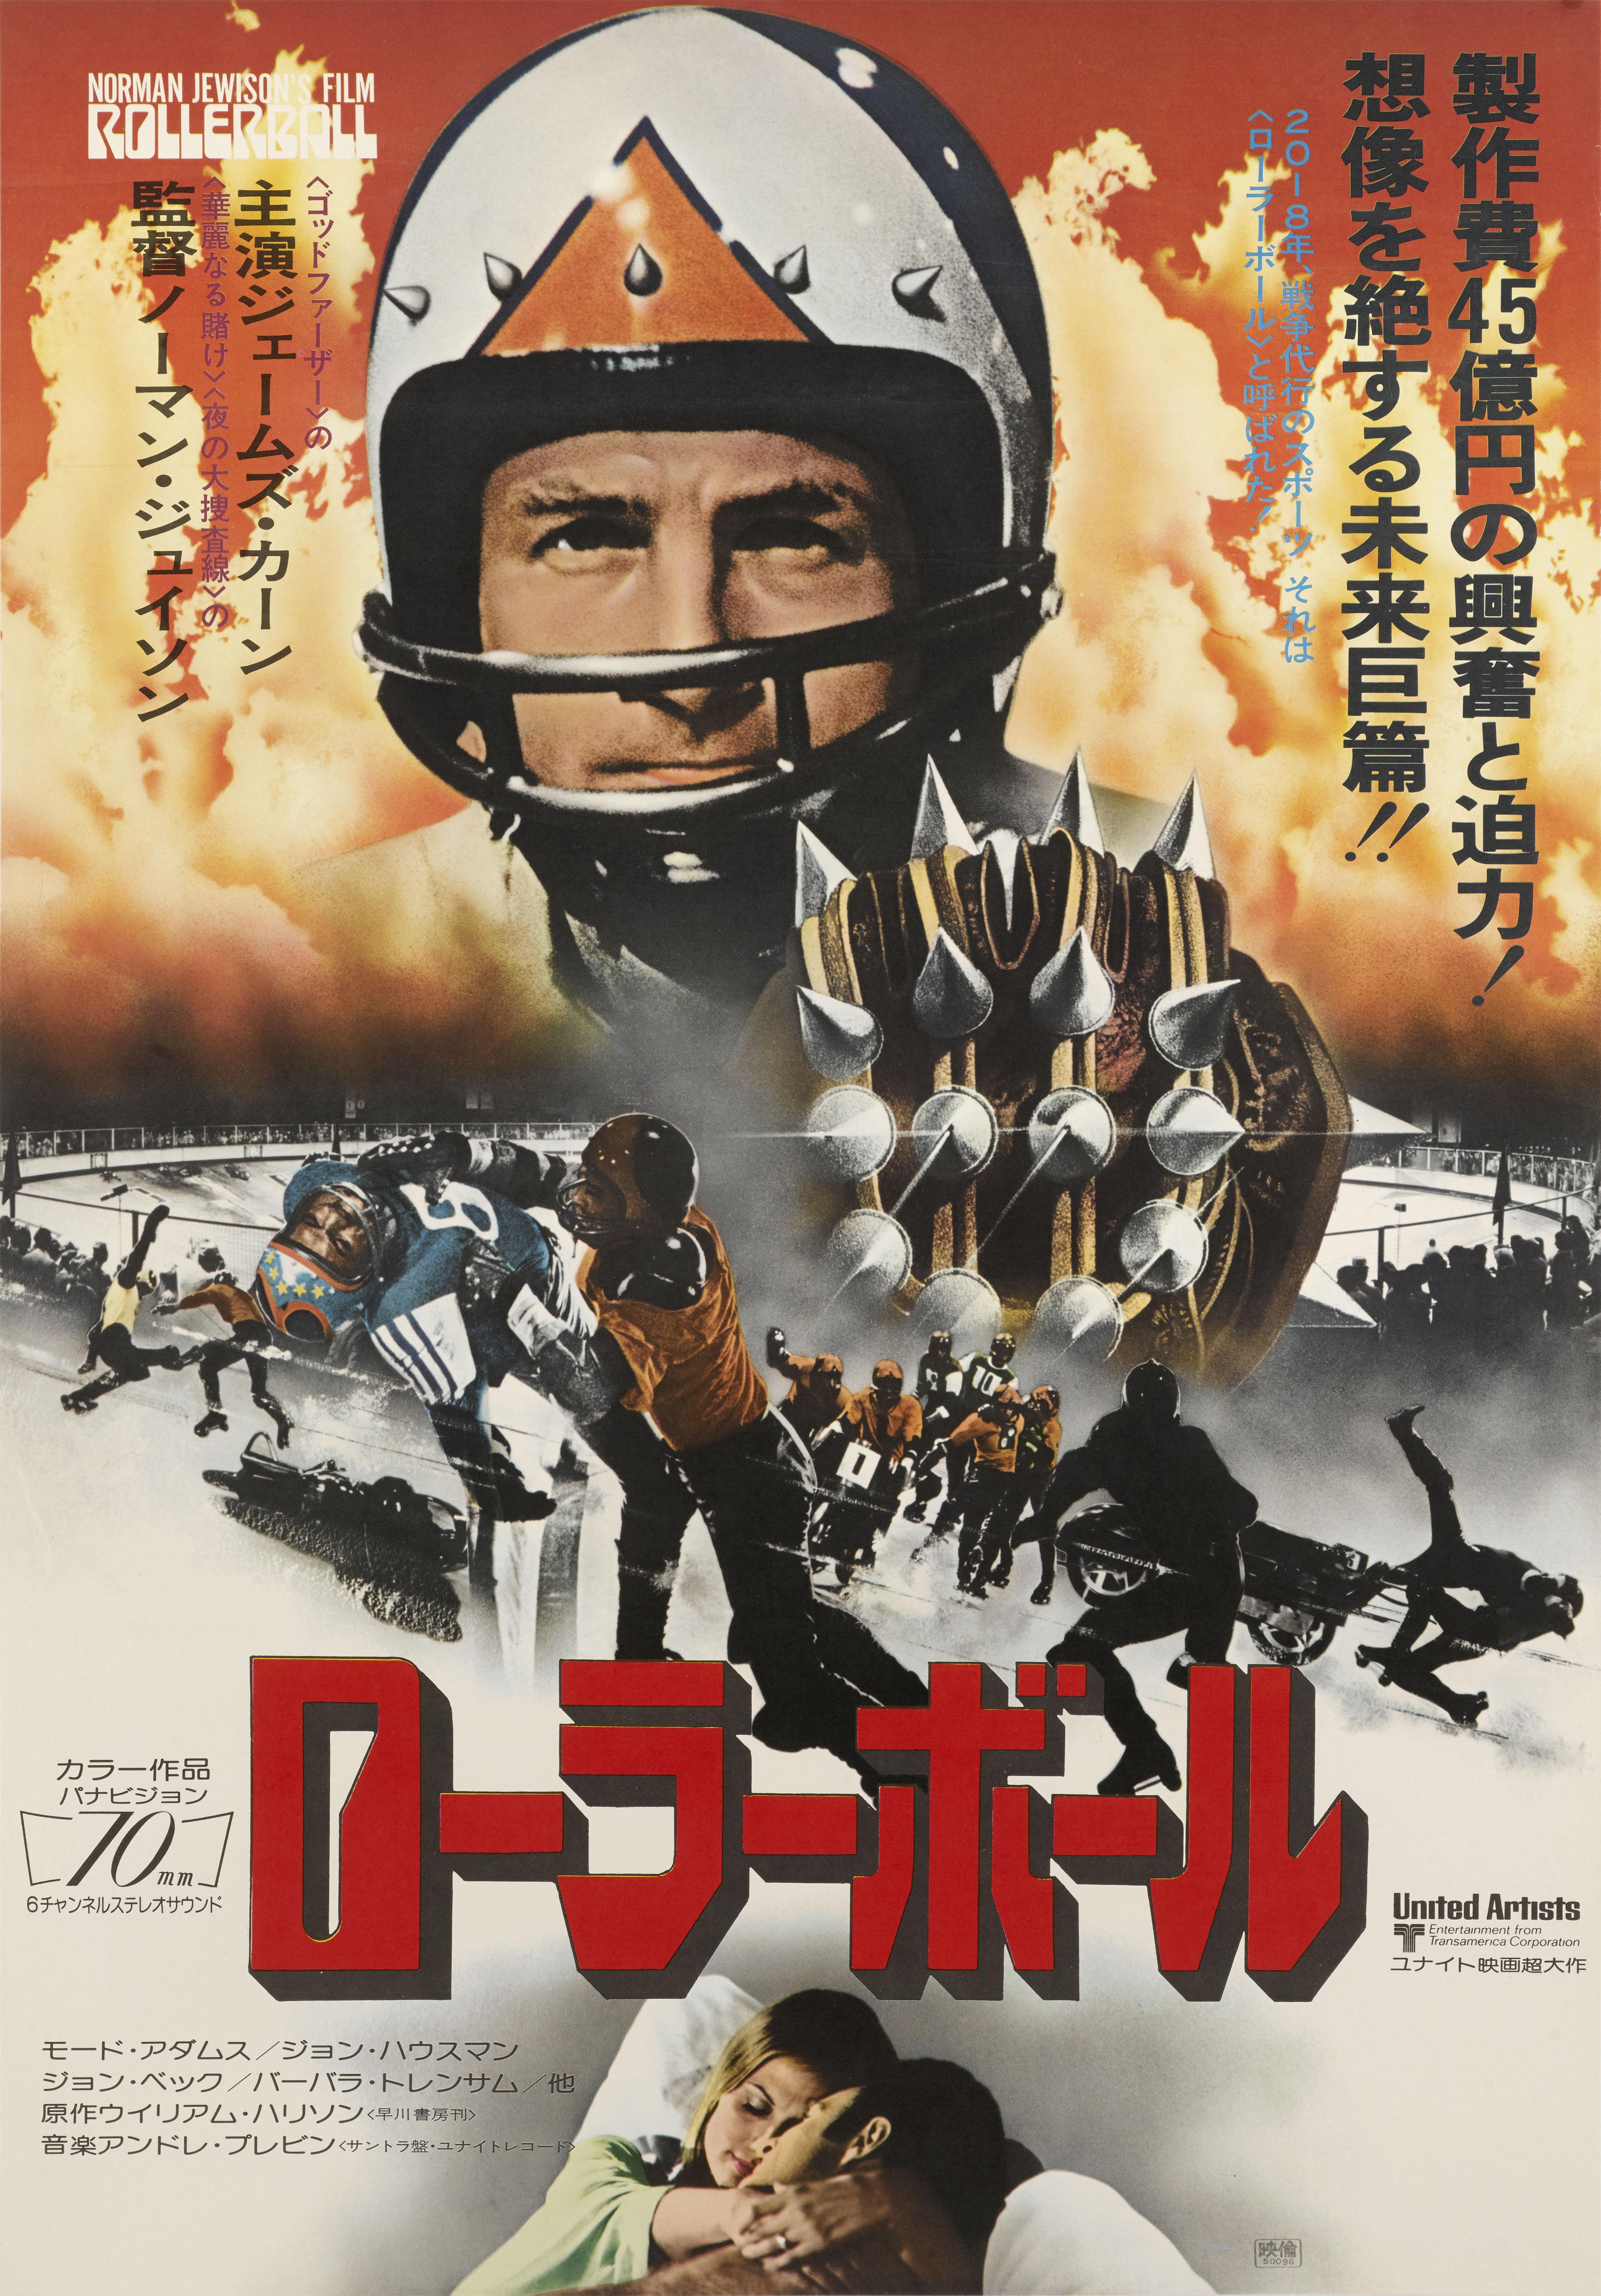 Original Japanese film poster for Norman Jewison's 1975 science fiction sports film.
The film starred James Caan and John Houseman.
  